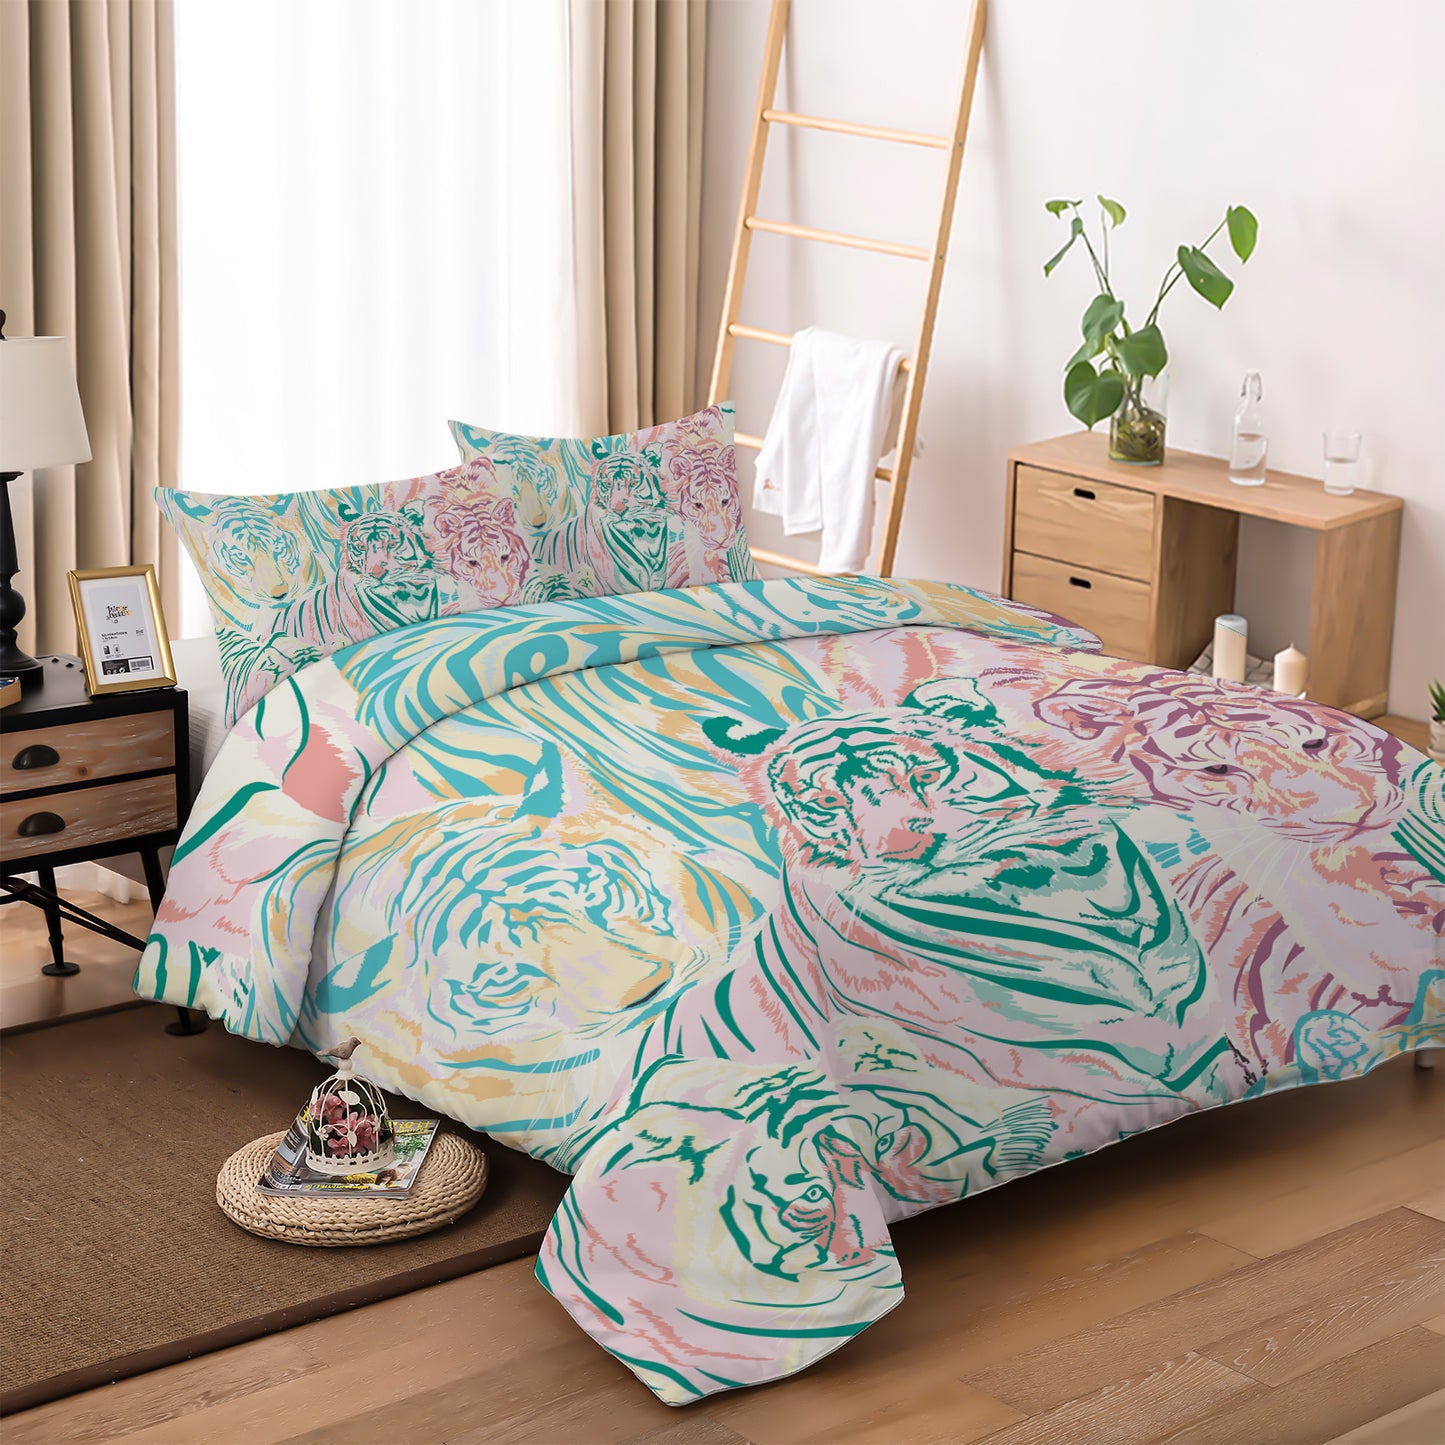 The Tiger Pattern Duvet Cover 4 Pieces Set With 2 Pillowcases